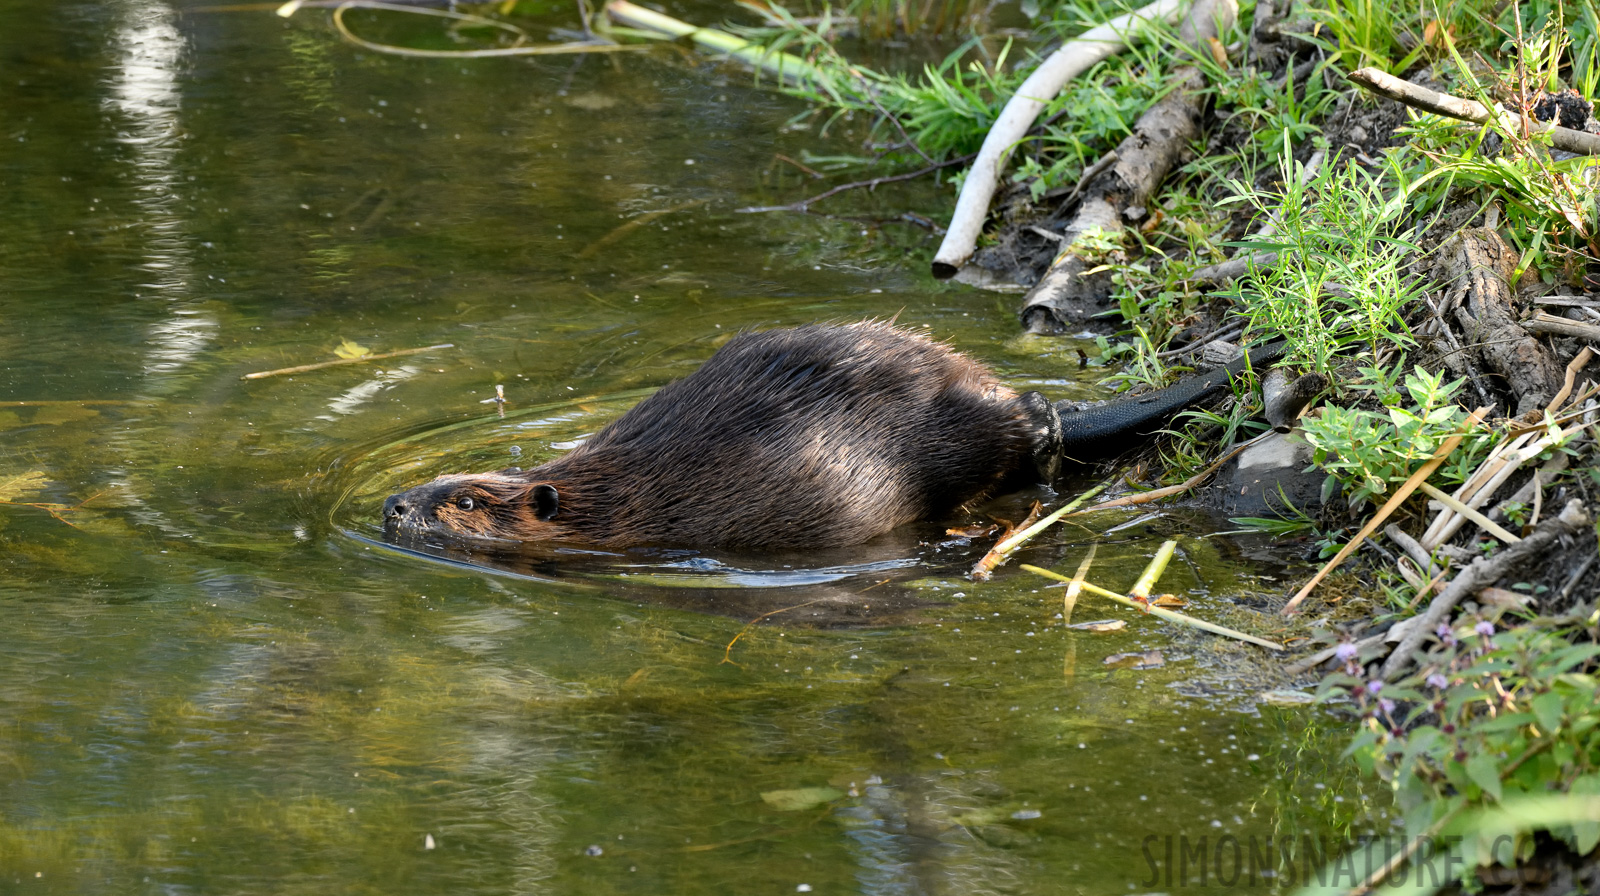 Castor canadensis [400 mm, 1/320 sec at f / 8.0, ISO 1600]